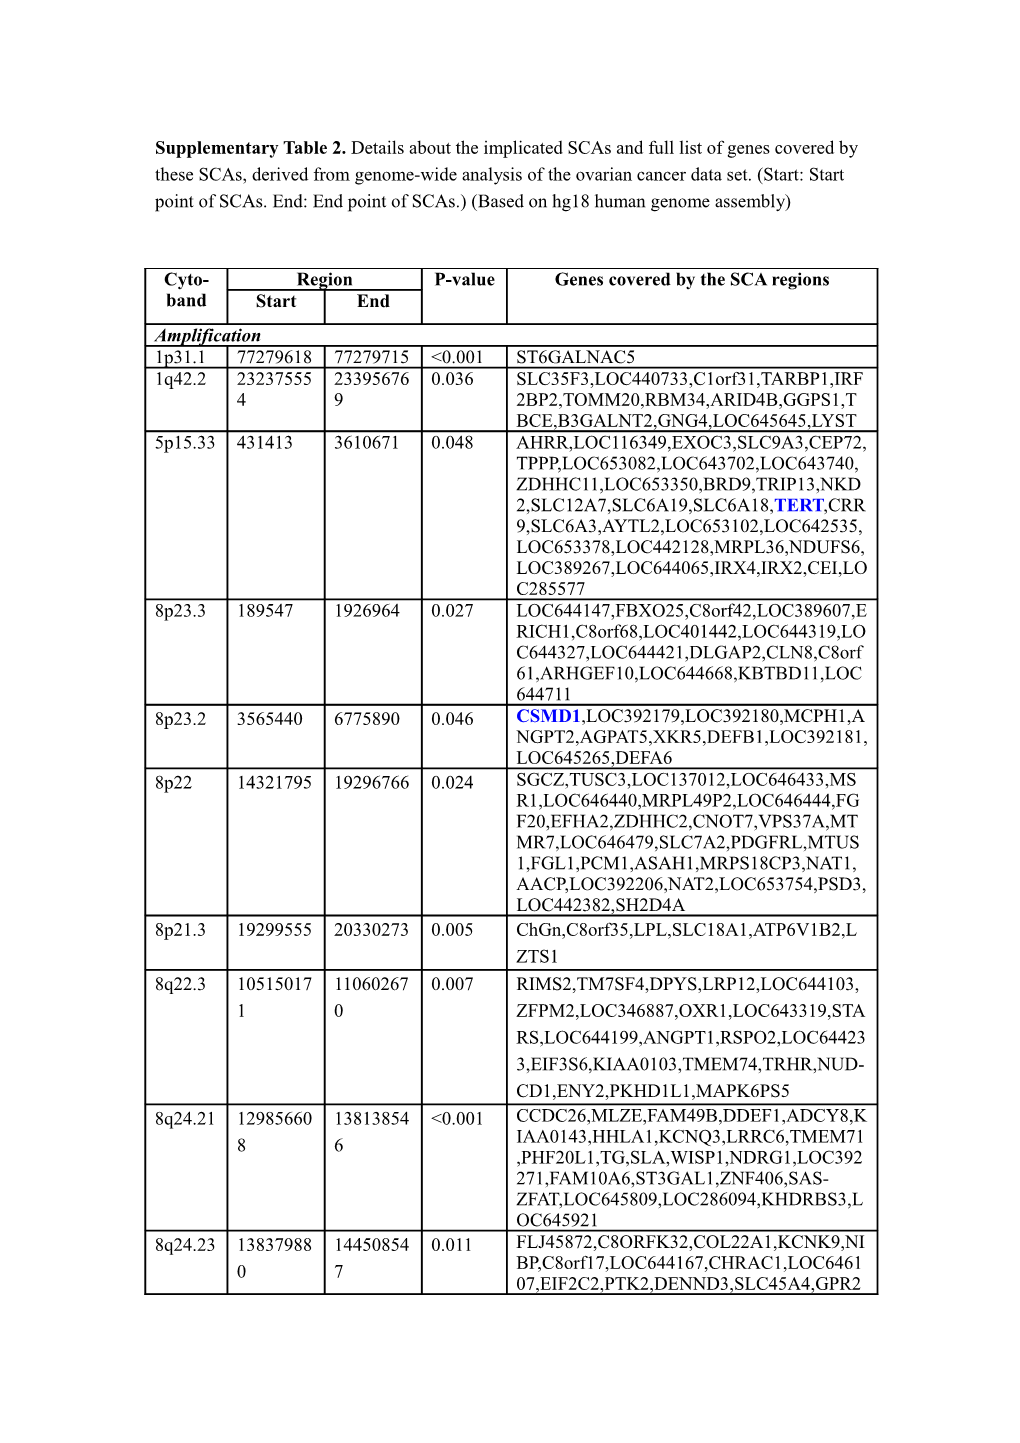 Supplementary Table 2. Details About the Implicated Scas and Full List of Genes Covered